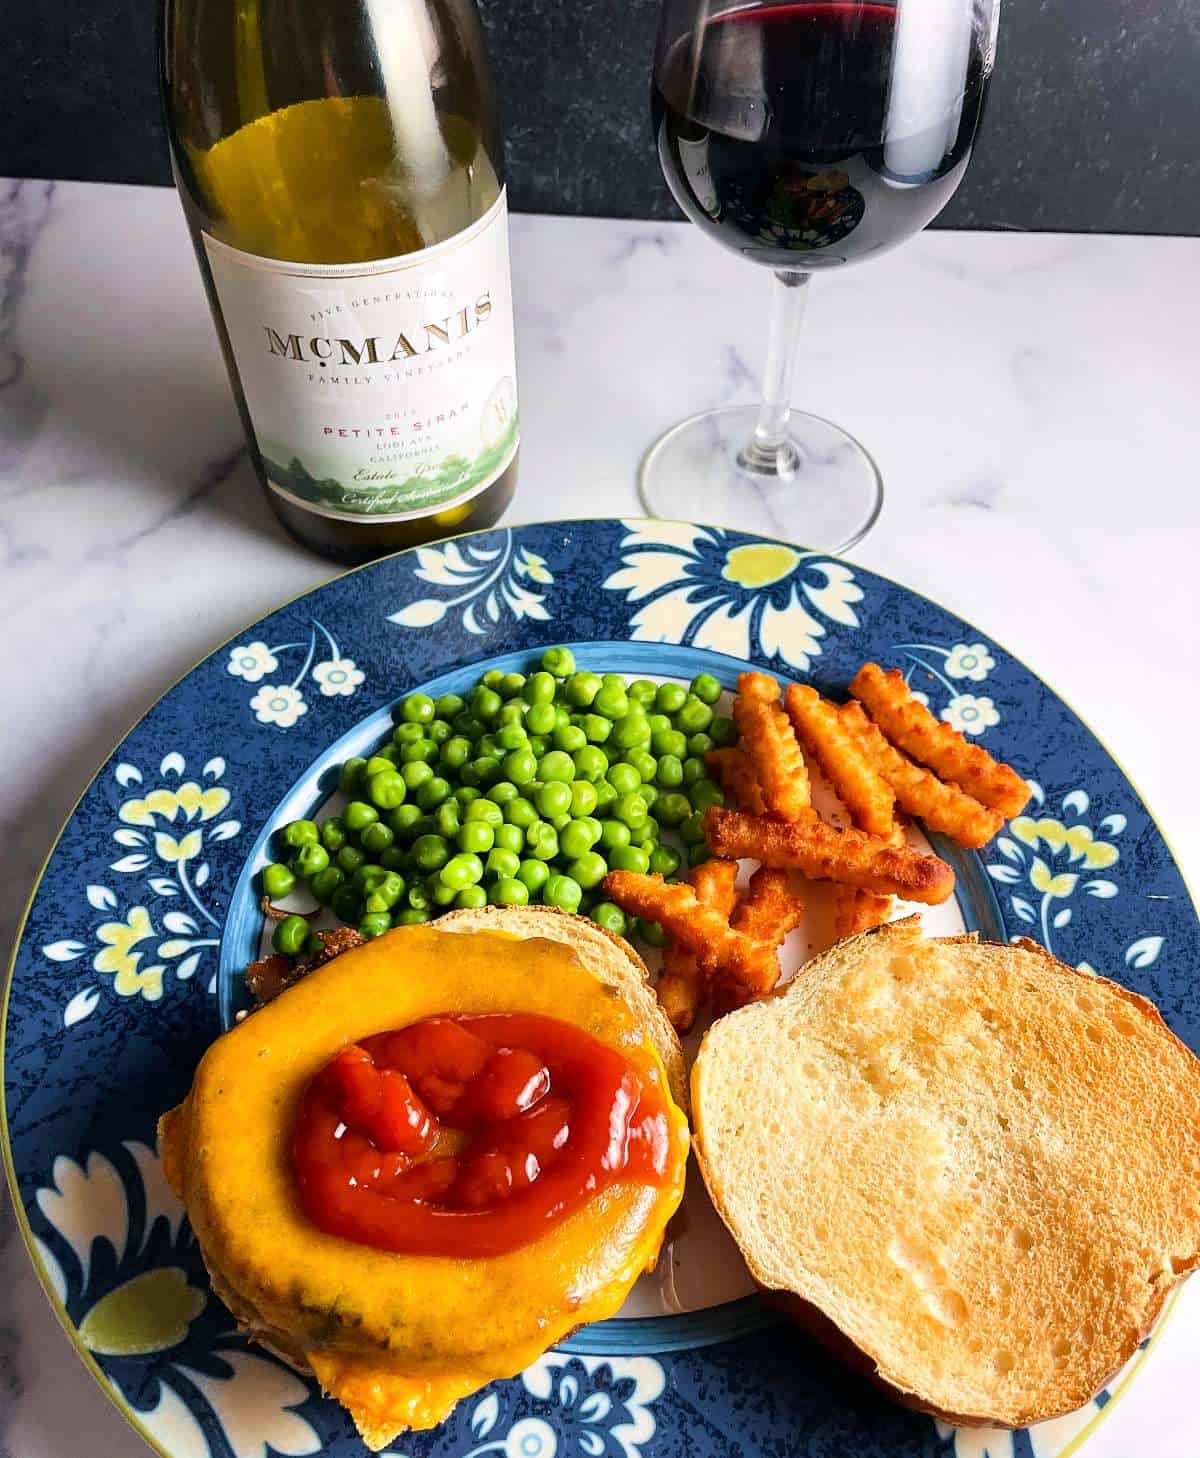 A veggie burger with cheese, topped with ketchup, with the top of the bun alongside the burger. Served with fries and peas, and Petite Sirah wine.